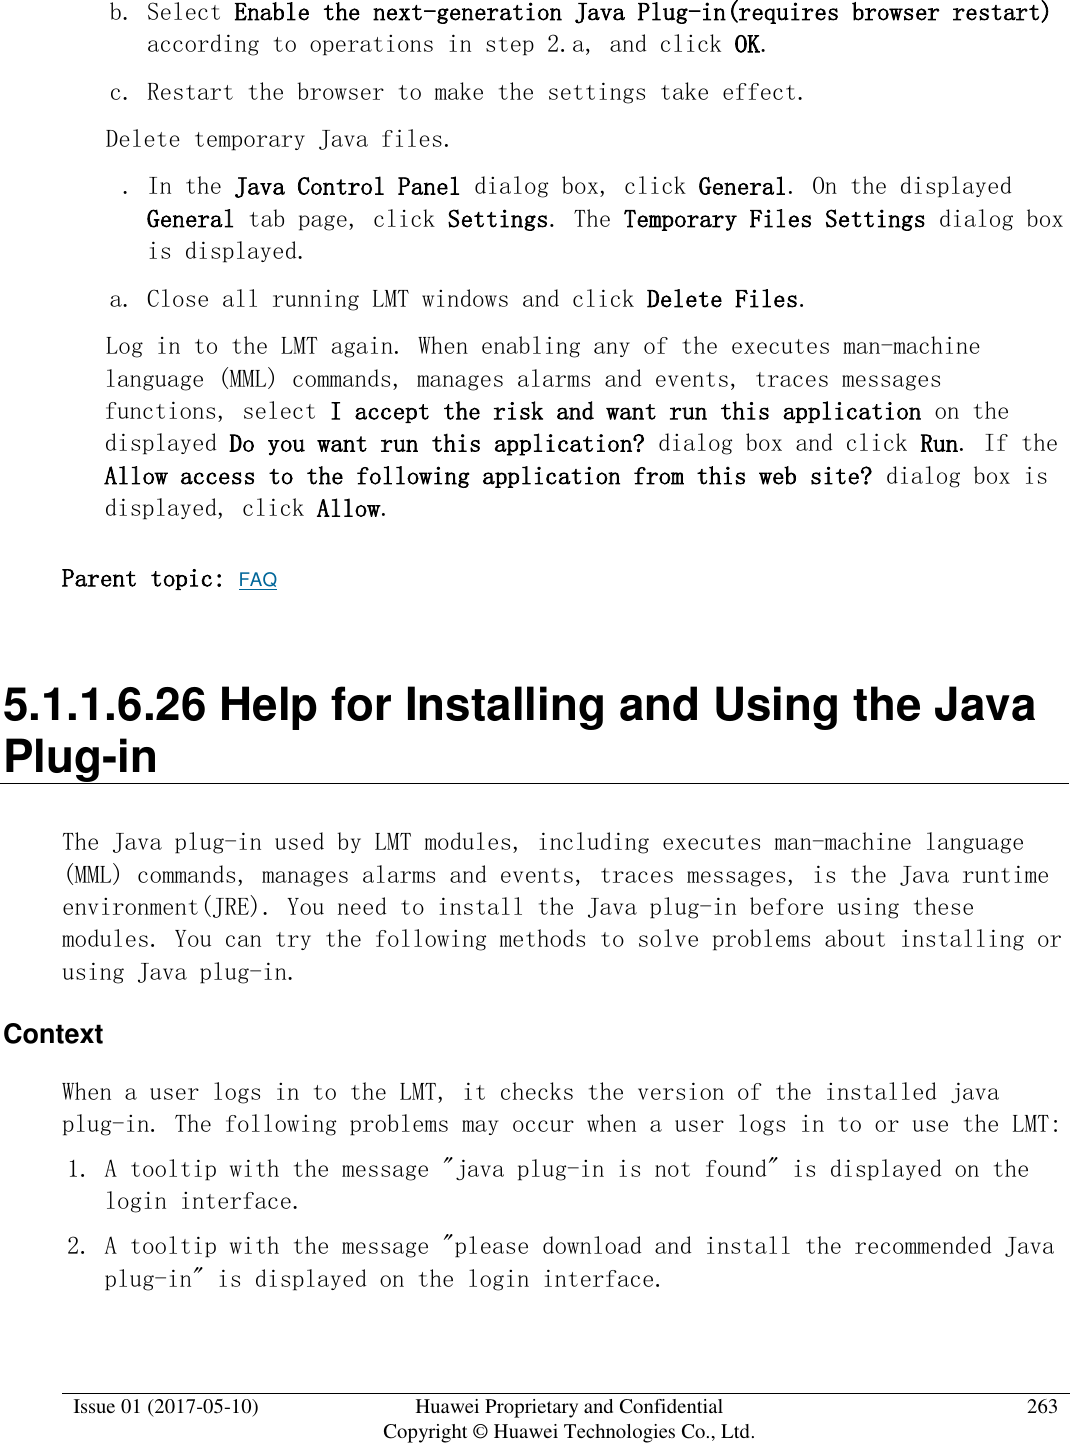  Issue 01 (2017-05-10) Huawei Proprietary and Confidential      Copyright © Huawei Technologies Co., Ltd. 263  b. Select Enable the next-generation Java Plug-in(requires browser restart) according to operations in step 2.a, and click OK. c. Restart the browser to make the settings take effect.   Delete temporary Java files.   . In the Java Control Panel dialog box, click General. On the displayed General tab page, click Settings. The Temporary Files Settings dialog box is displayed.  a. Close all running LMT windows and click Delete Files.  Log in to the LMT again. When enabling any of the executes man-machine language (MML) commands, manages alarms and events, traces messages functions, select I accept the risk and want run this application on the displayed Do you want run this application? dialog box and click Run. If the Allow access to the following application from this web site? dialog box is displayed, click Allow.  Parent topic: FAQ 5.1.1.6.26 Help for Installing and Using the Java Plug-in The Java plug-in used by LMT modules, including executes man-machine language (MML) commands, manages alarms and events, traces messages, is the Java runtime environment(JRE). You need to install the Java plug-in before using these modules. You can try the following methods to solve problems about installing or using Java plug-in. Context When a user logs in to the LMT, it checks the version of the installed java plug-in. The following problems may occur when a user logs in to or use the LMT: 1. A tooltip with the message &quot;java plug-in is not found&quot; is displayed on the login interface. 2. A tooltip with the message &quot;please download and install the recommended Java plug-in&quot; is displayed on the login interface. 